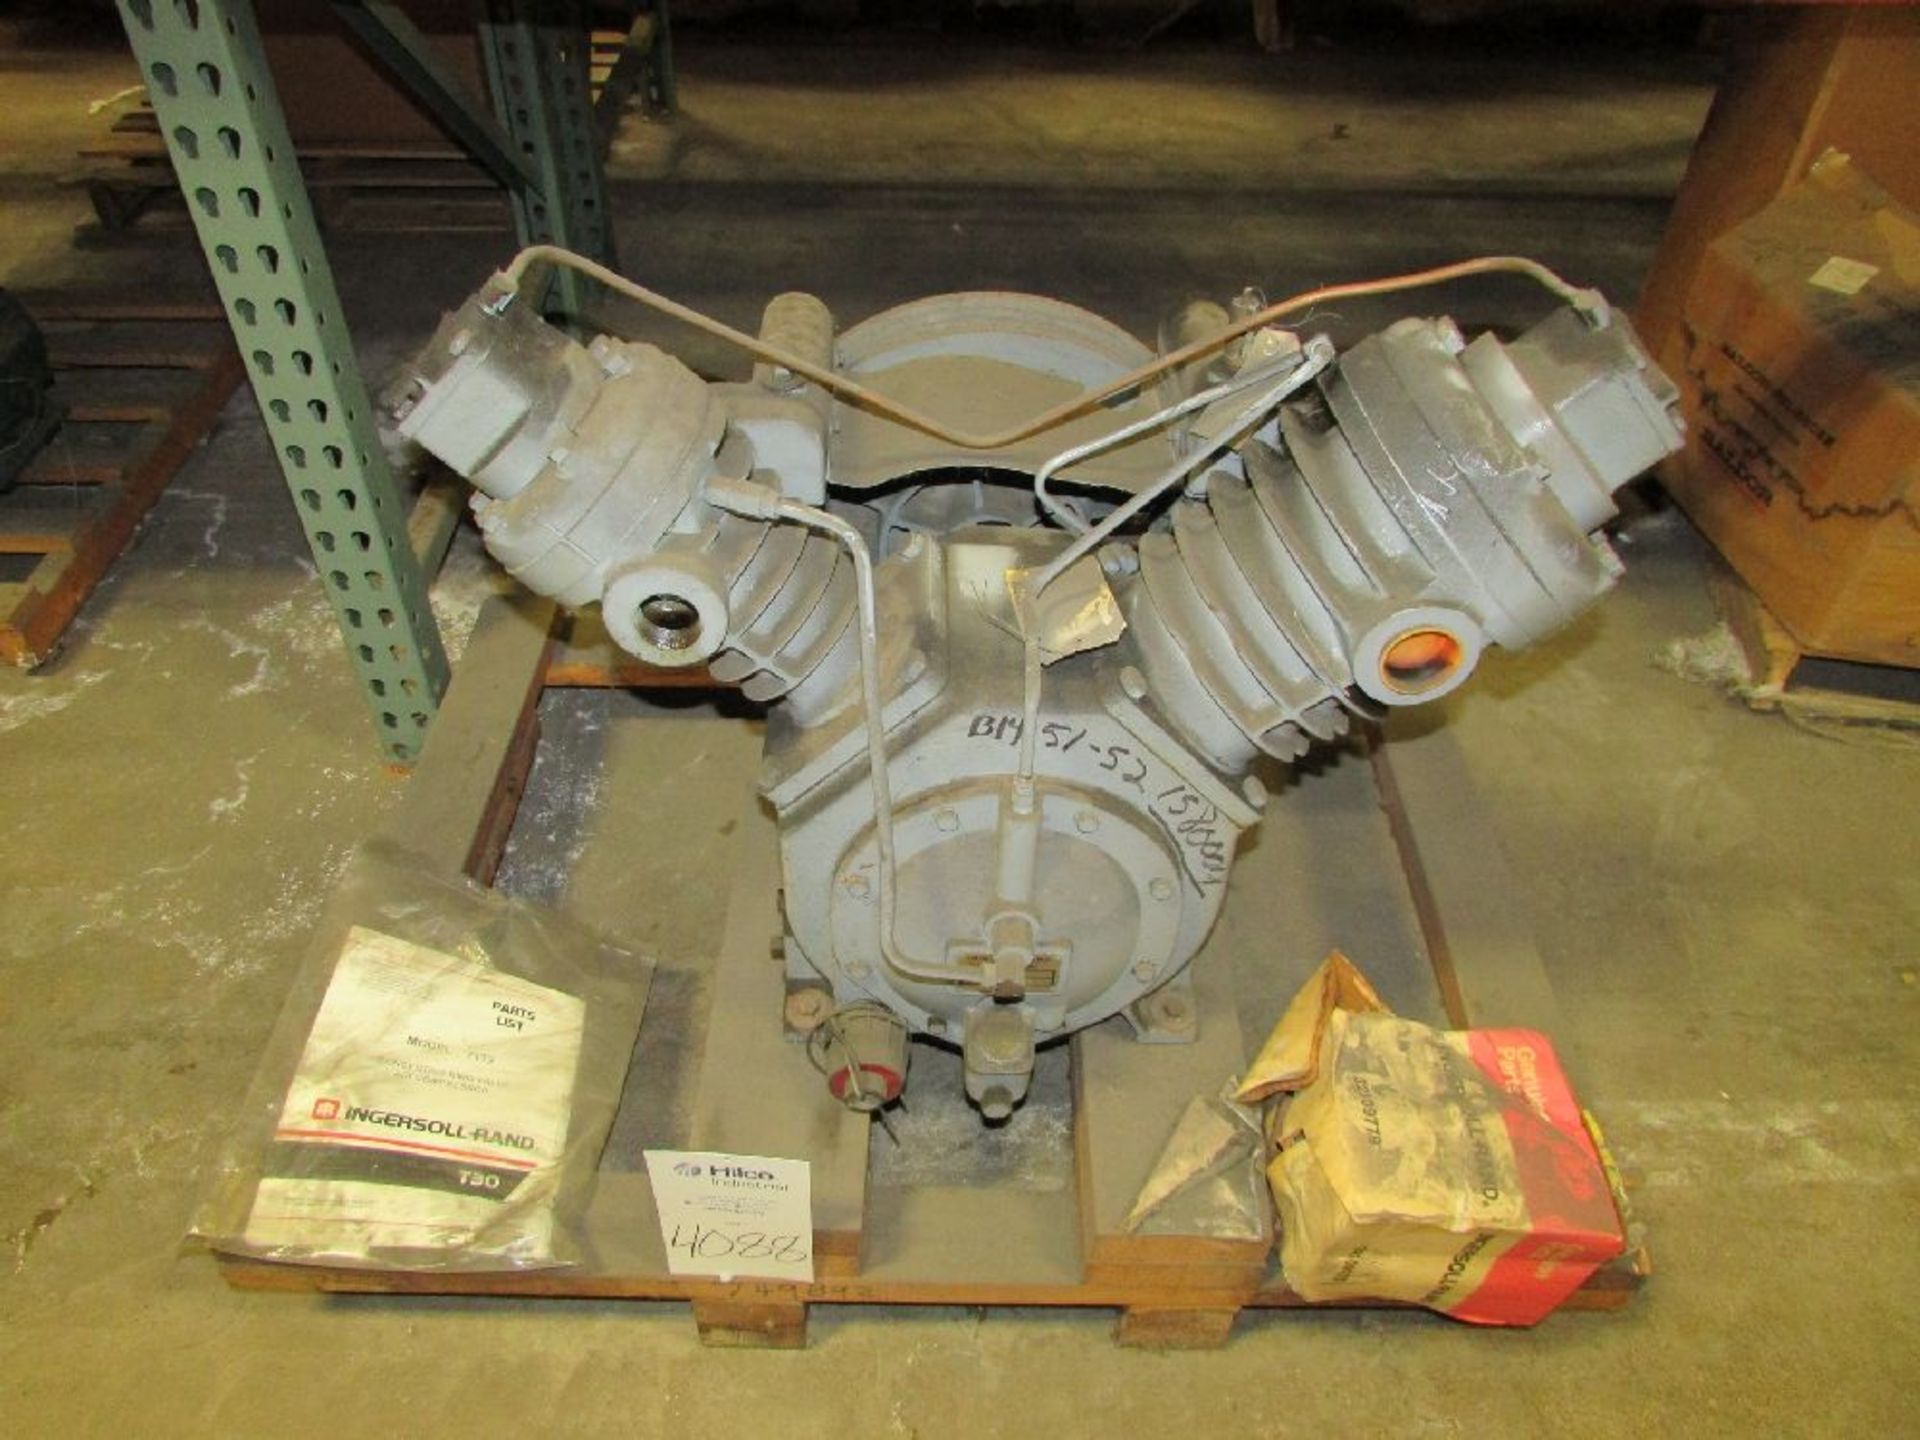 Ingersoll Rand Model 71T2 Concentric Ring Valve Air Compressor